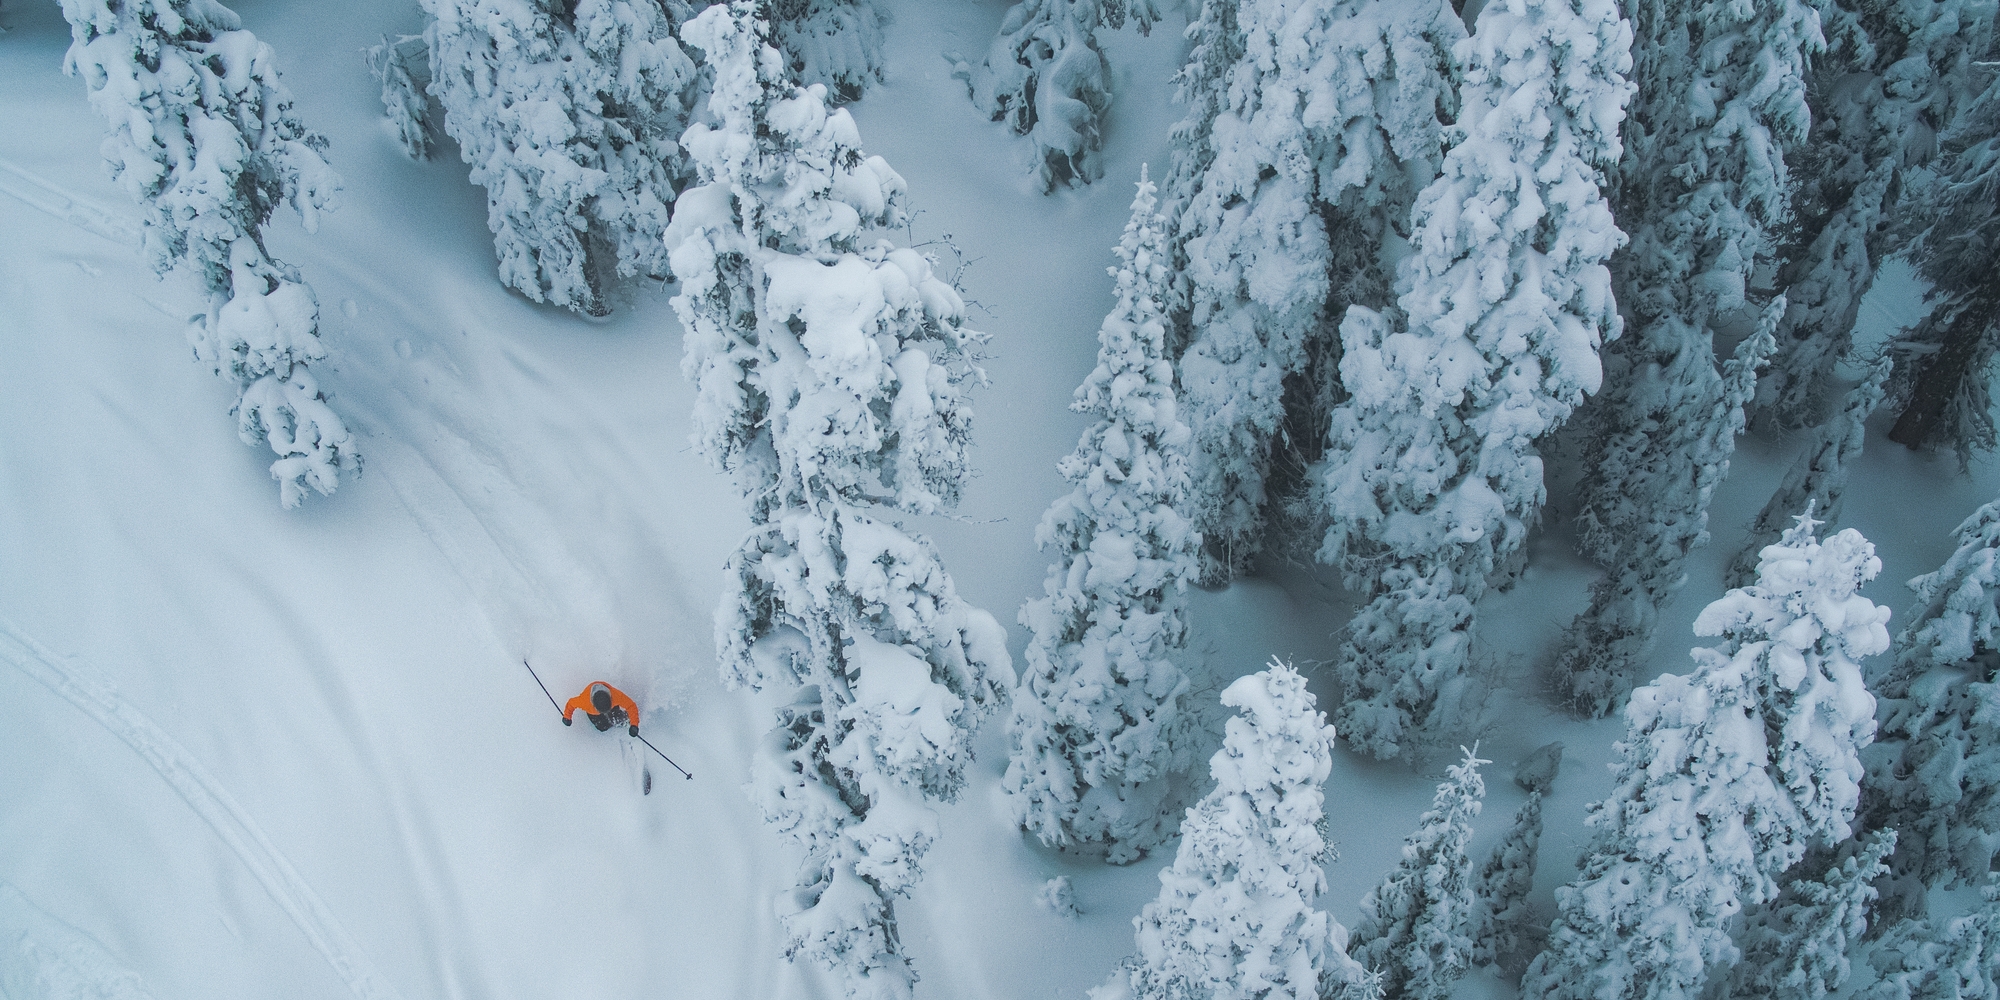 Soul Searcher, Freeride Skiing route in California